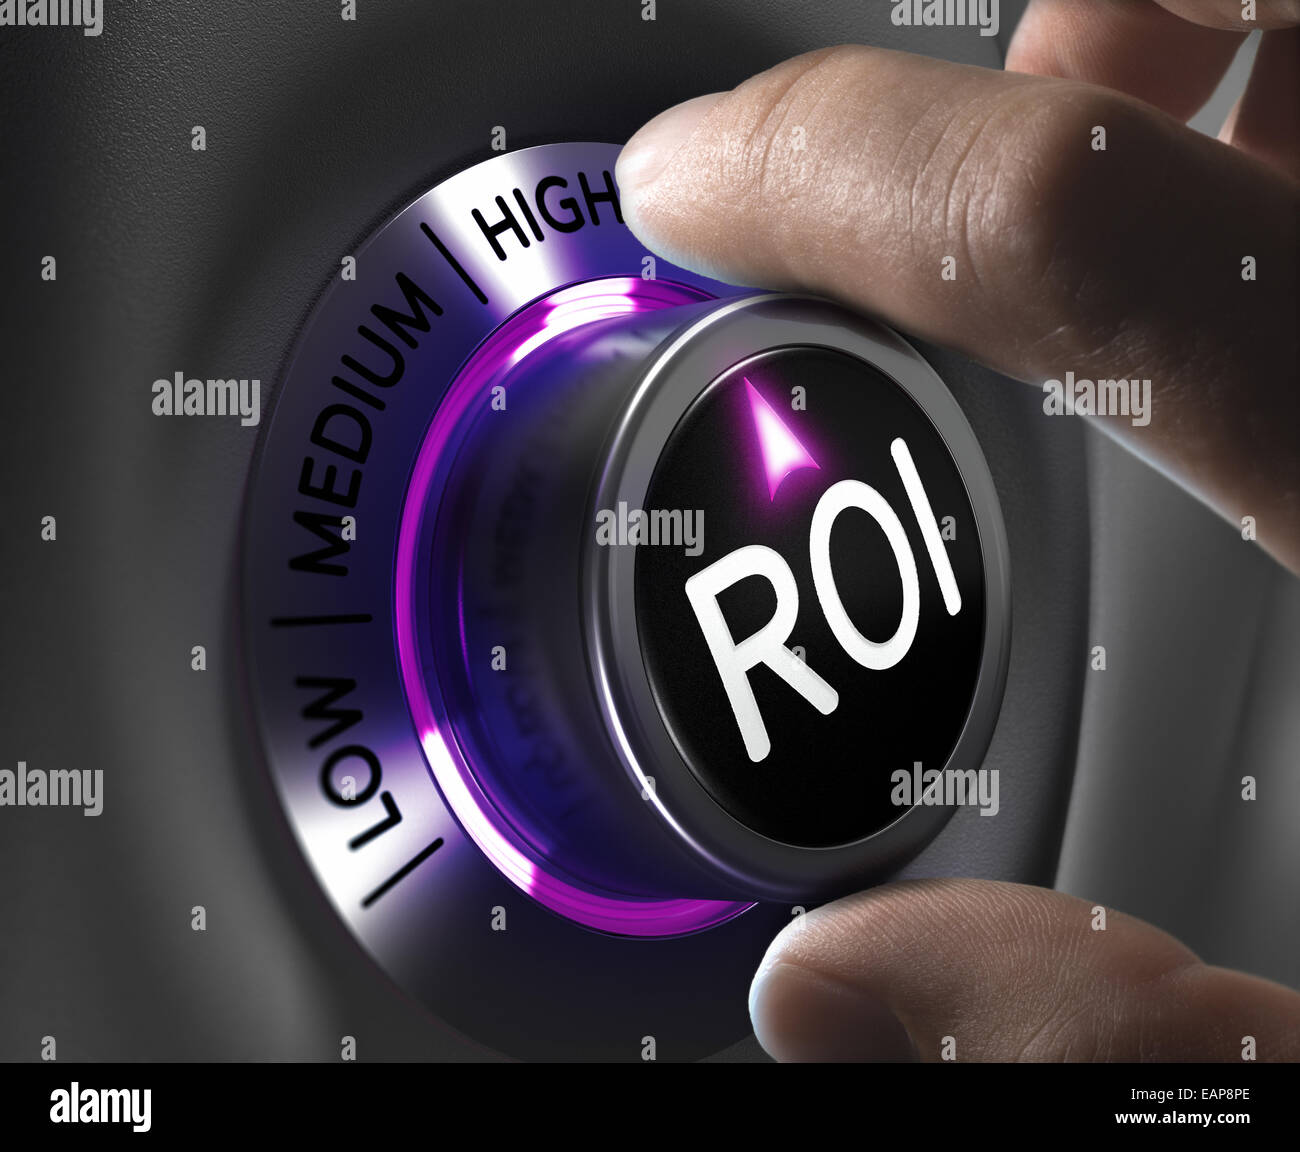 Return on Investment, ROI Concept, two fingers turning button in the highest position. Conceptual image Stock Photo